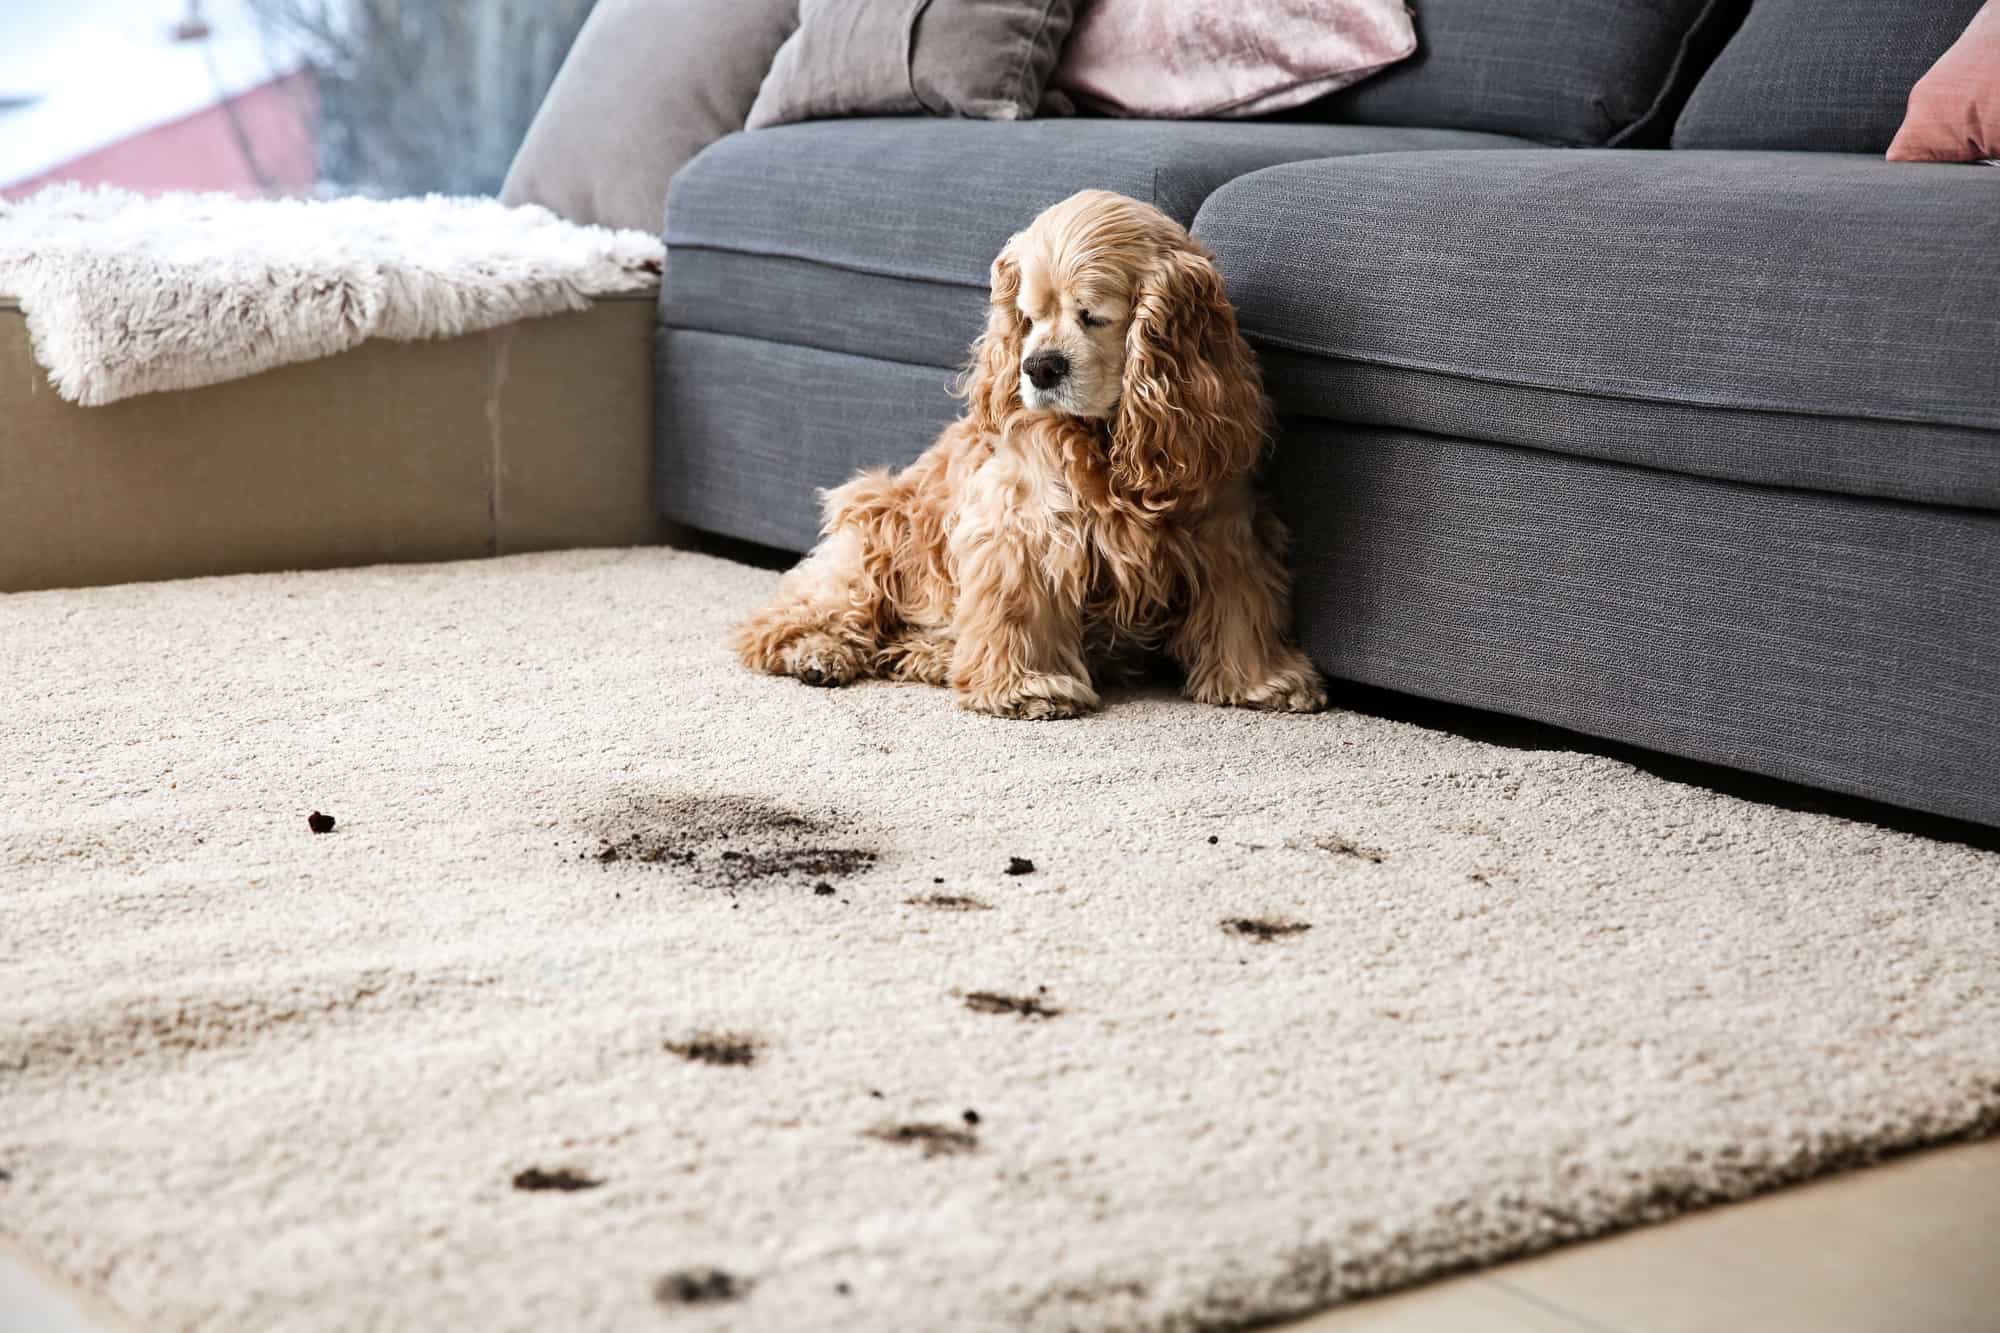 How Do You Get A Dog Poop Stain Out Of Carpet